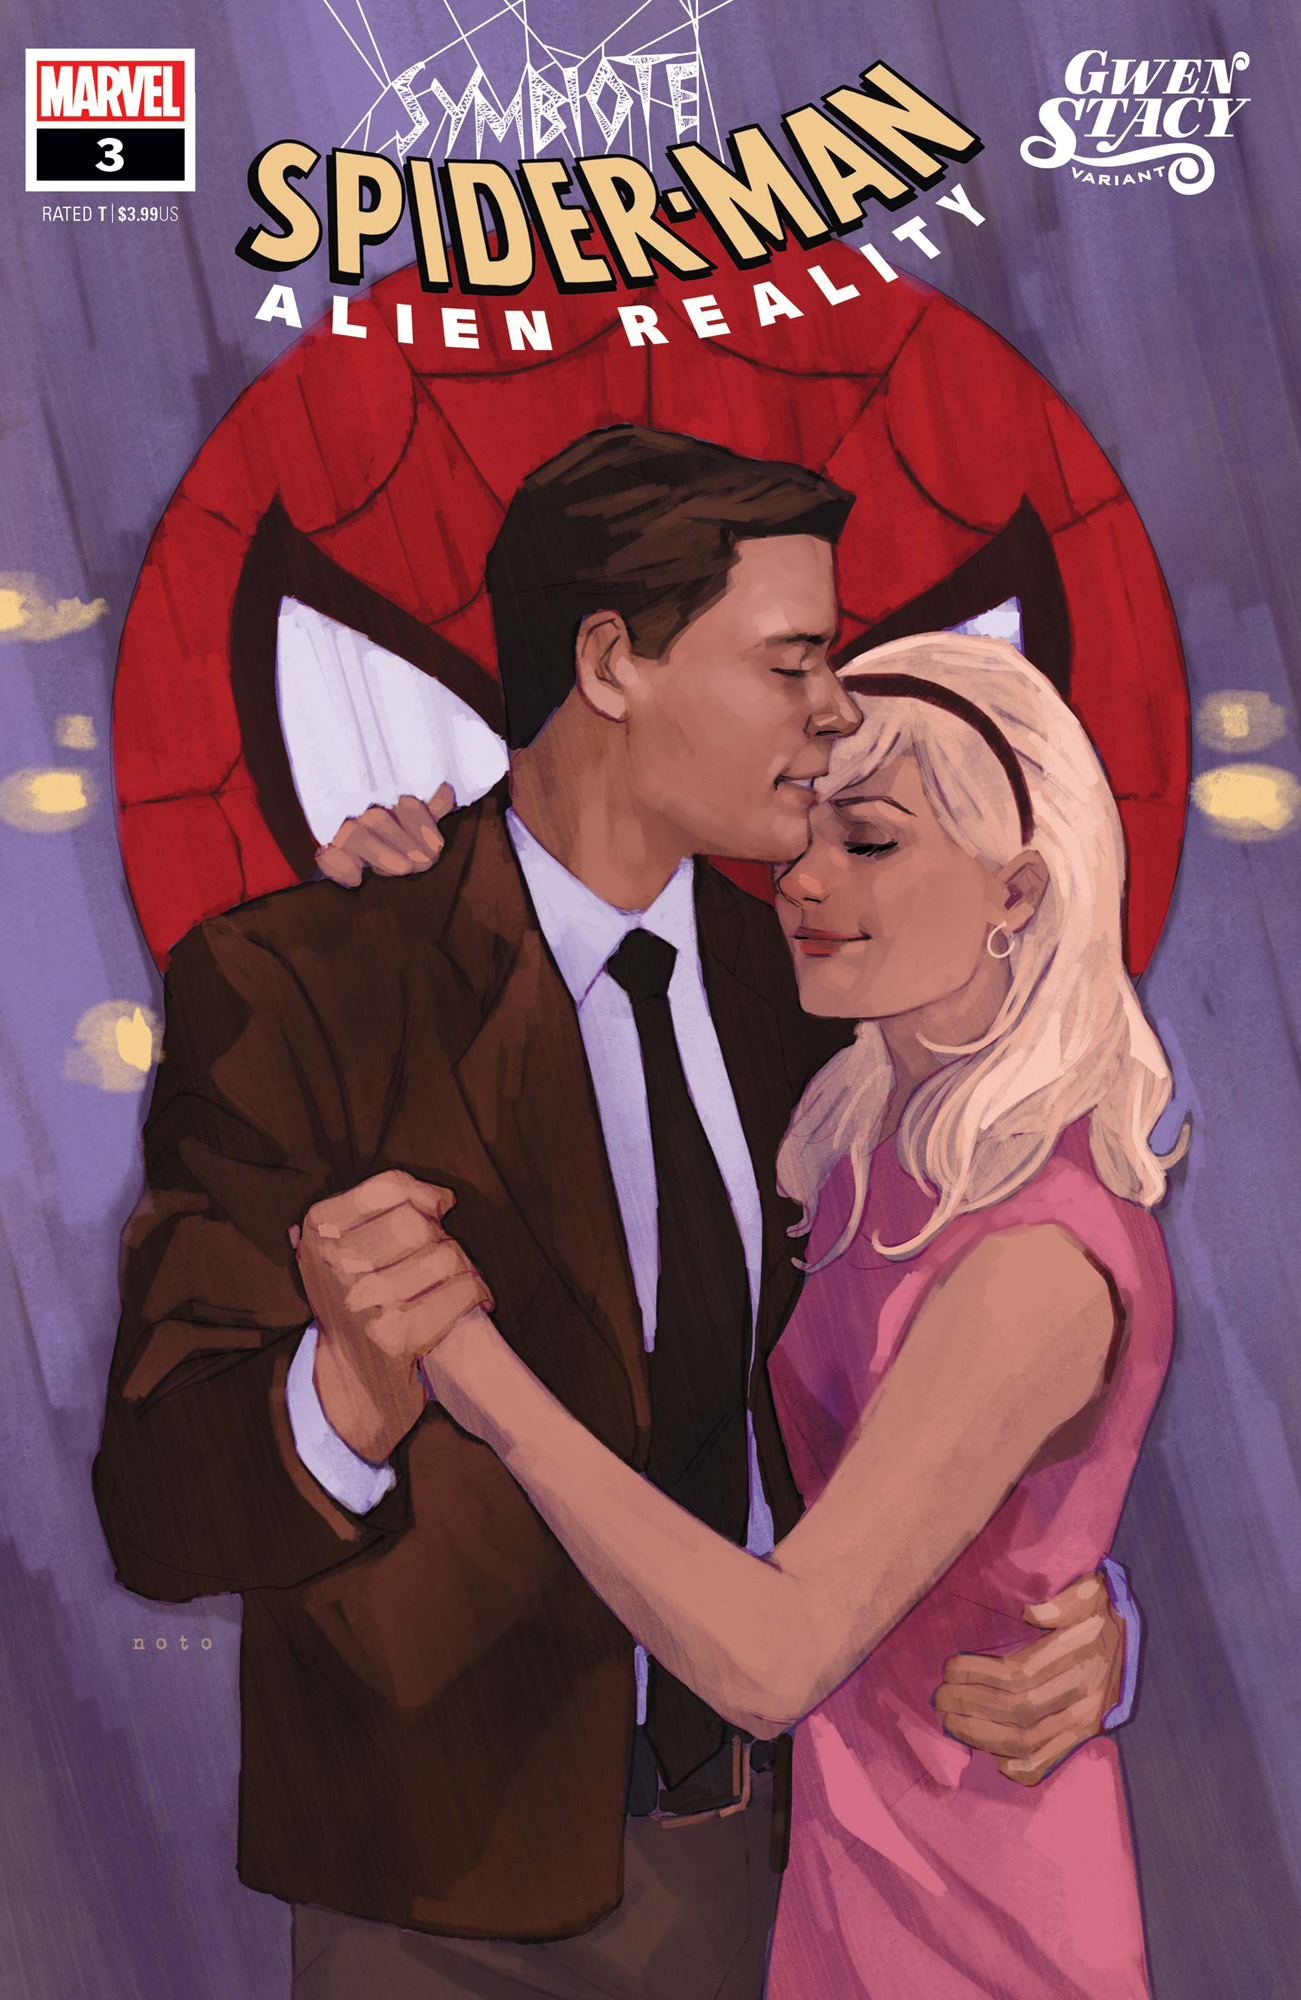 Symbiote Spider-Man: Alien Reality #3, The Amazing Spider-Man #39, Gwen  Stacy #1 by Jie Yaun *